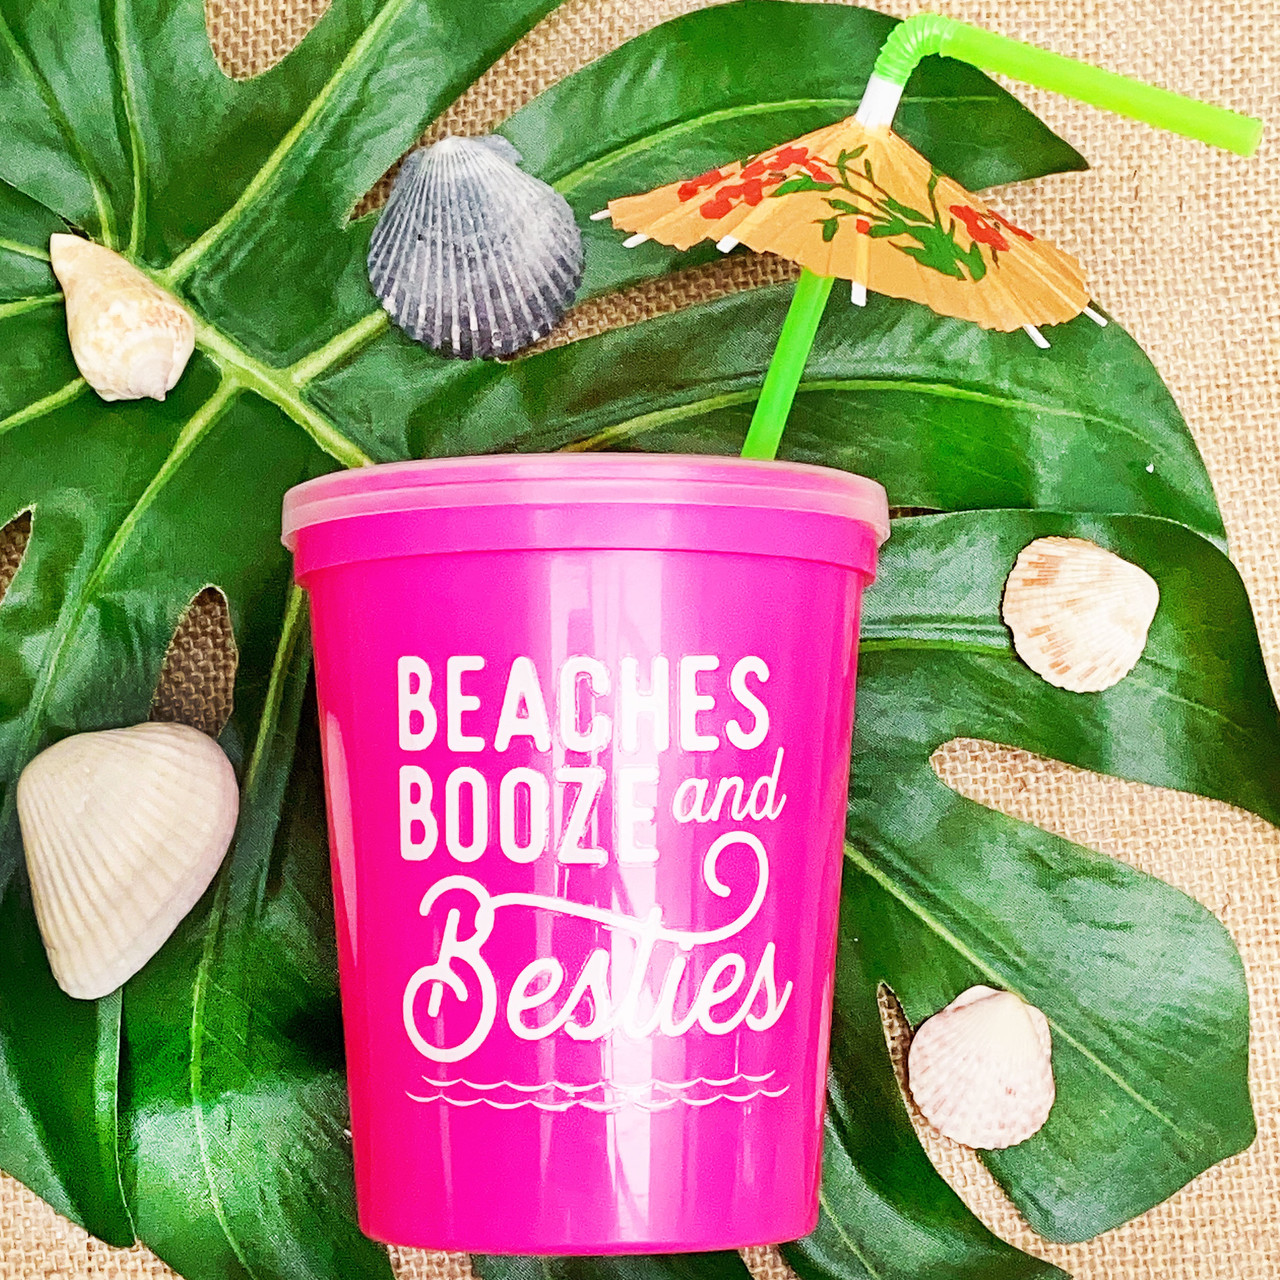 https://cdn11.bigcommerce.com/s-5grzuu6/images/stencil/1280x1280/products/5169/52075/Beach-Booze-Besties_16_oz_Plastic_Tumbler_Stadium_Cup_with_Straw_and_Lid_Pink__26623.1681854771.jpg?c=2